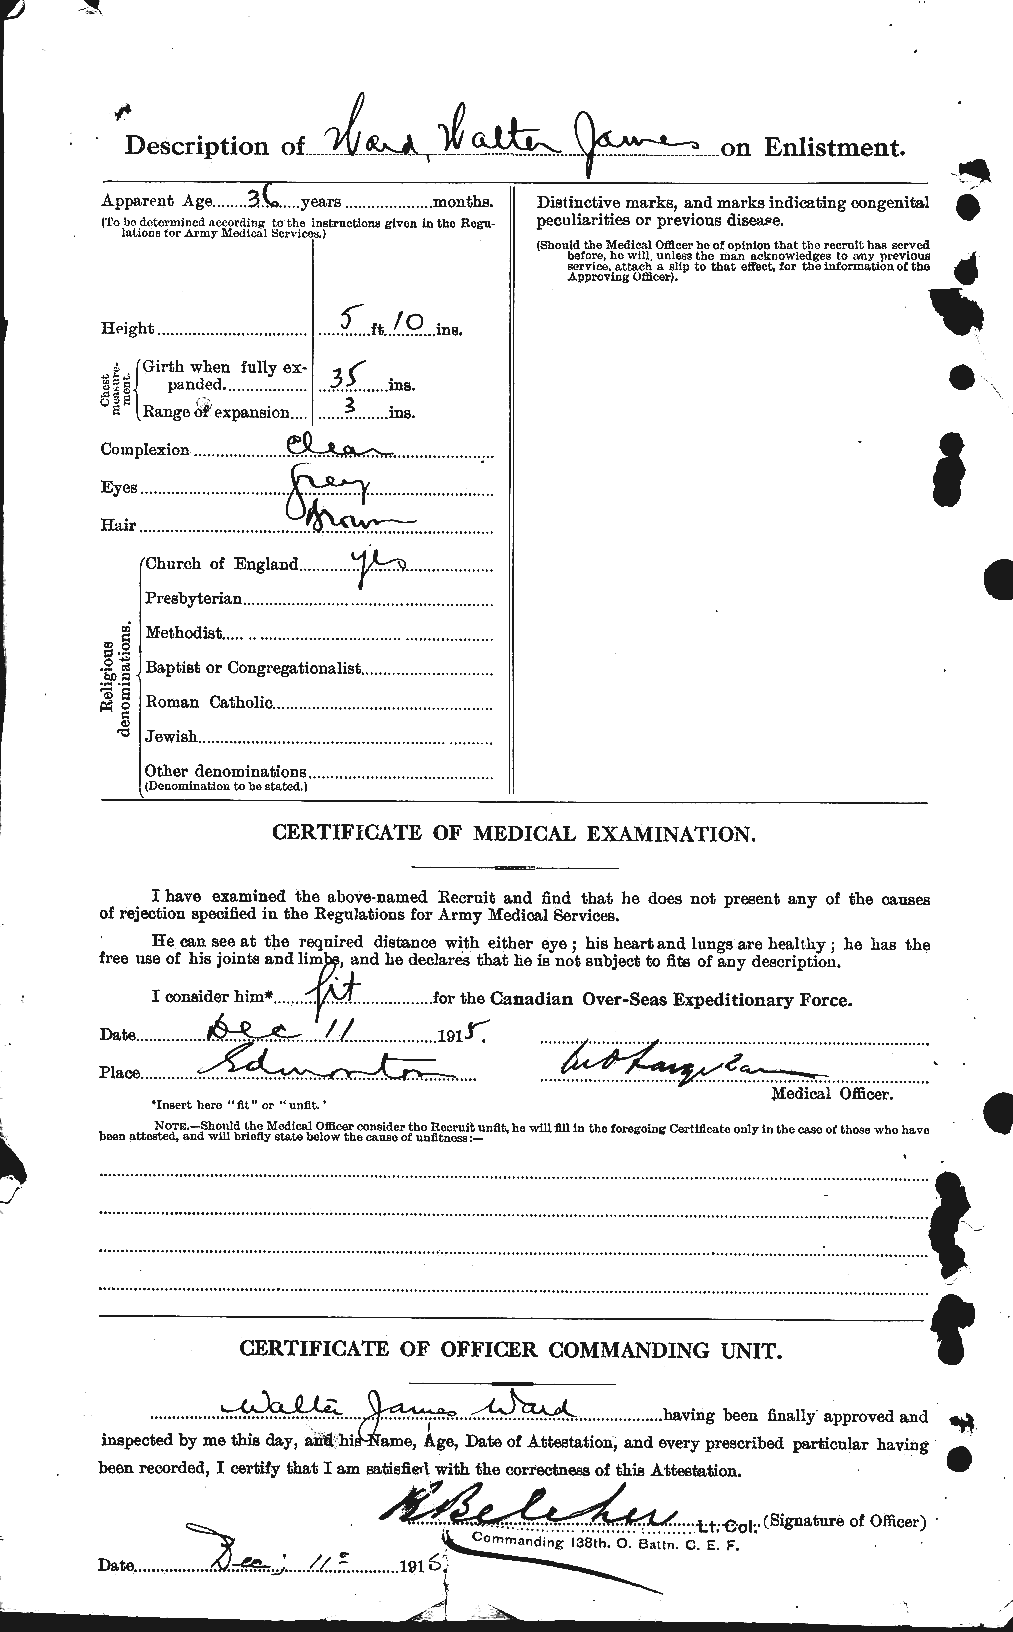 Personnel Records of the First World War - CEF 659758b